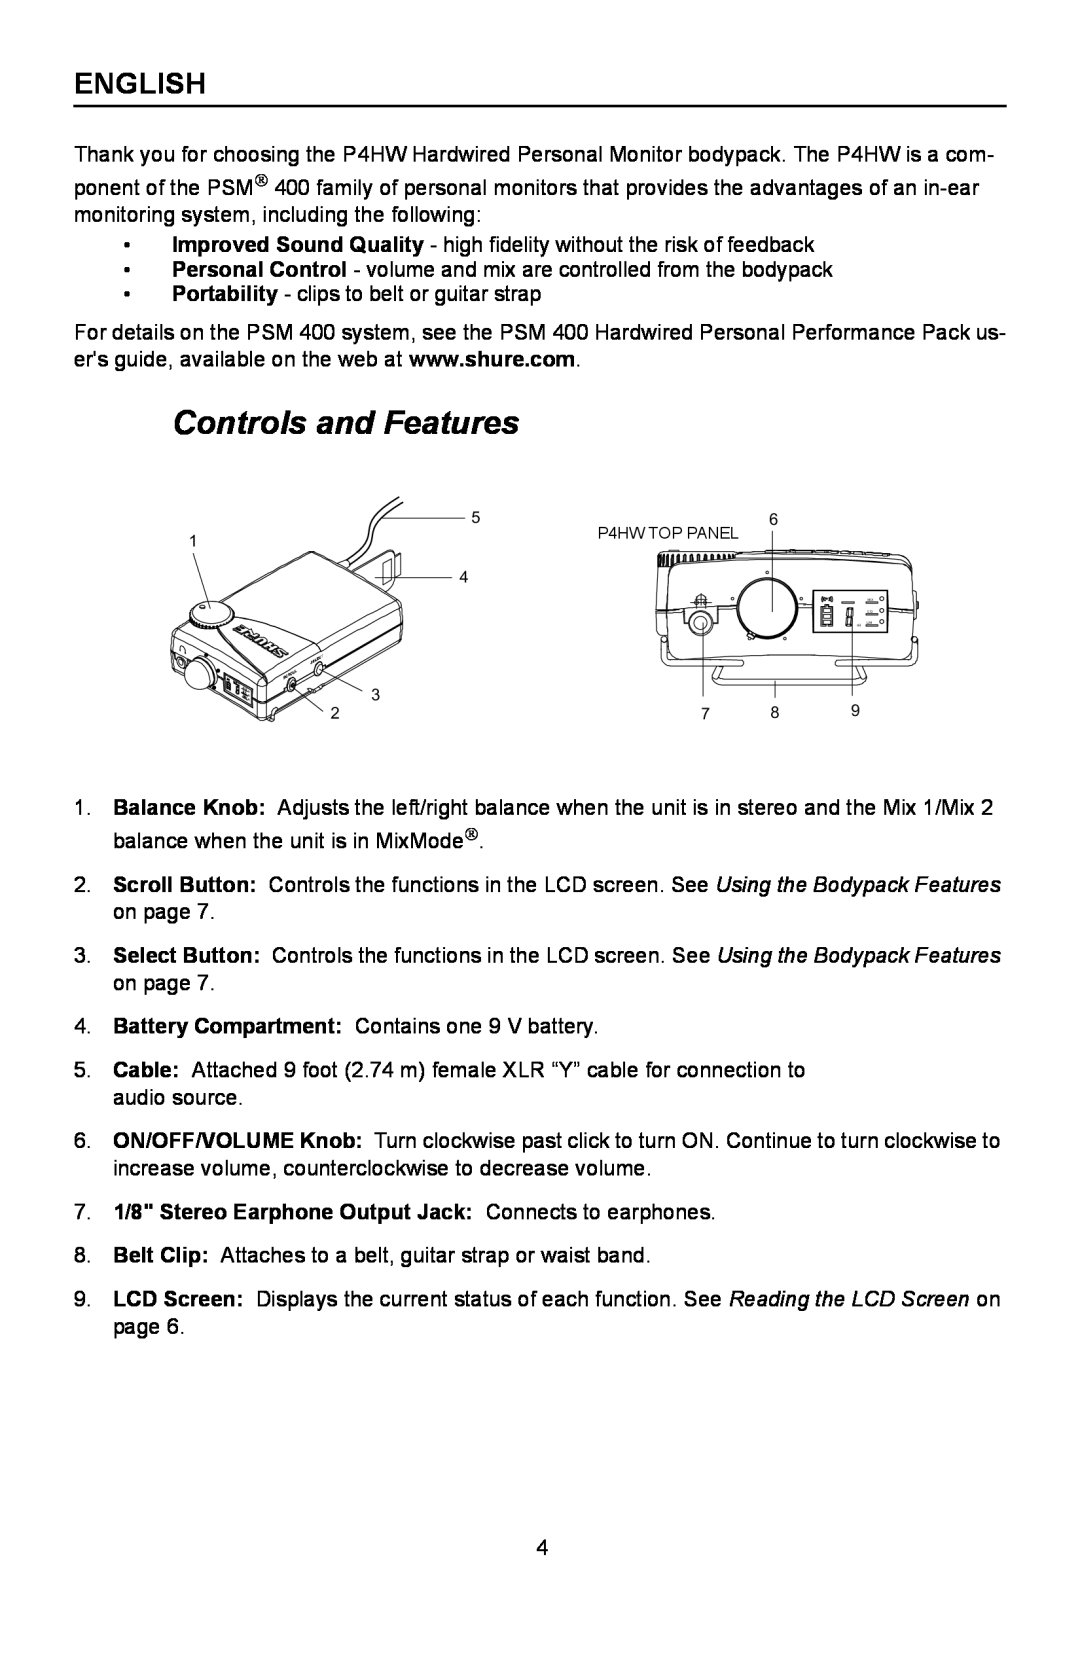 Shure P4HW manual Controls and Features, English 